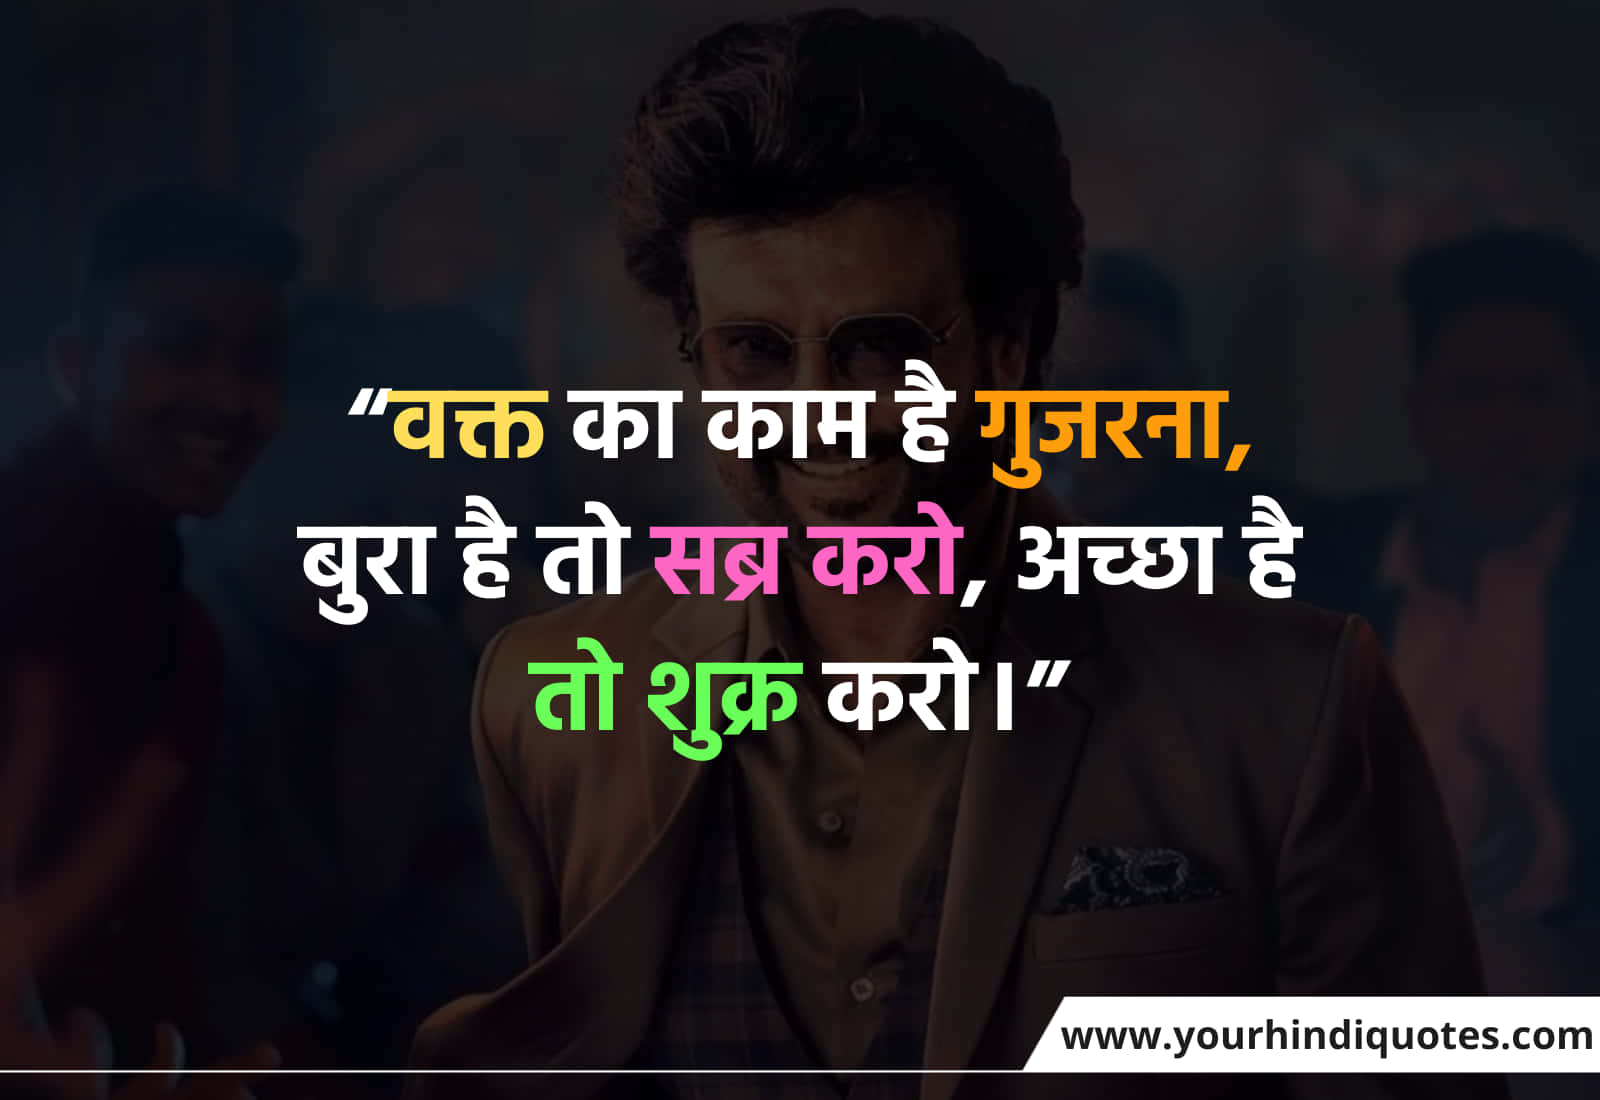 Hindi Good Night Quotes For Her